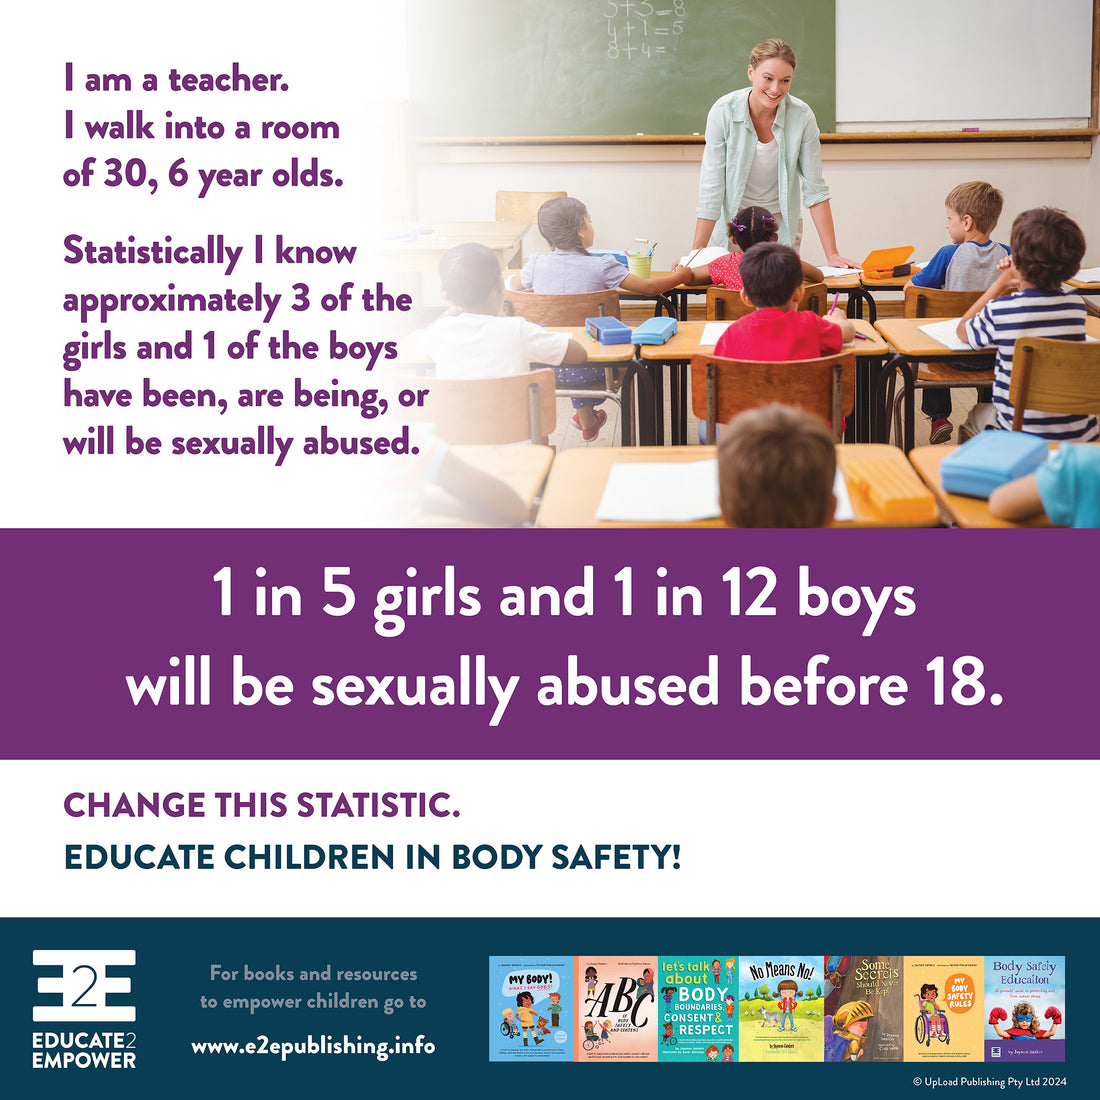 1 in 5 girls and 1 in 12 boys will be sexually abused before 18.